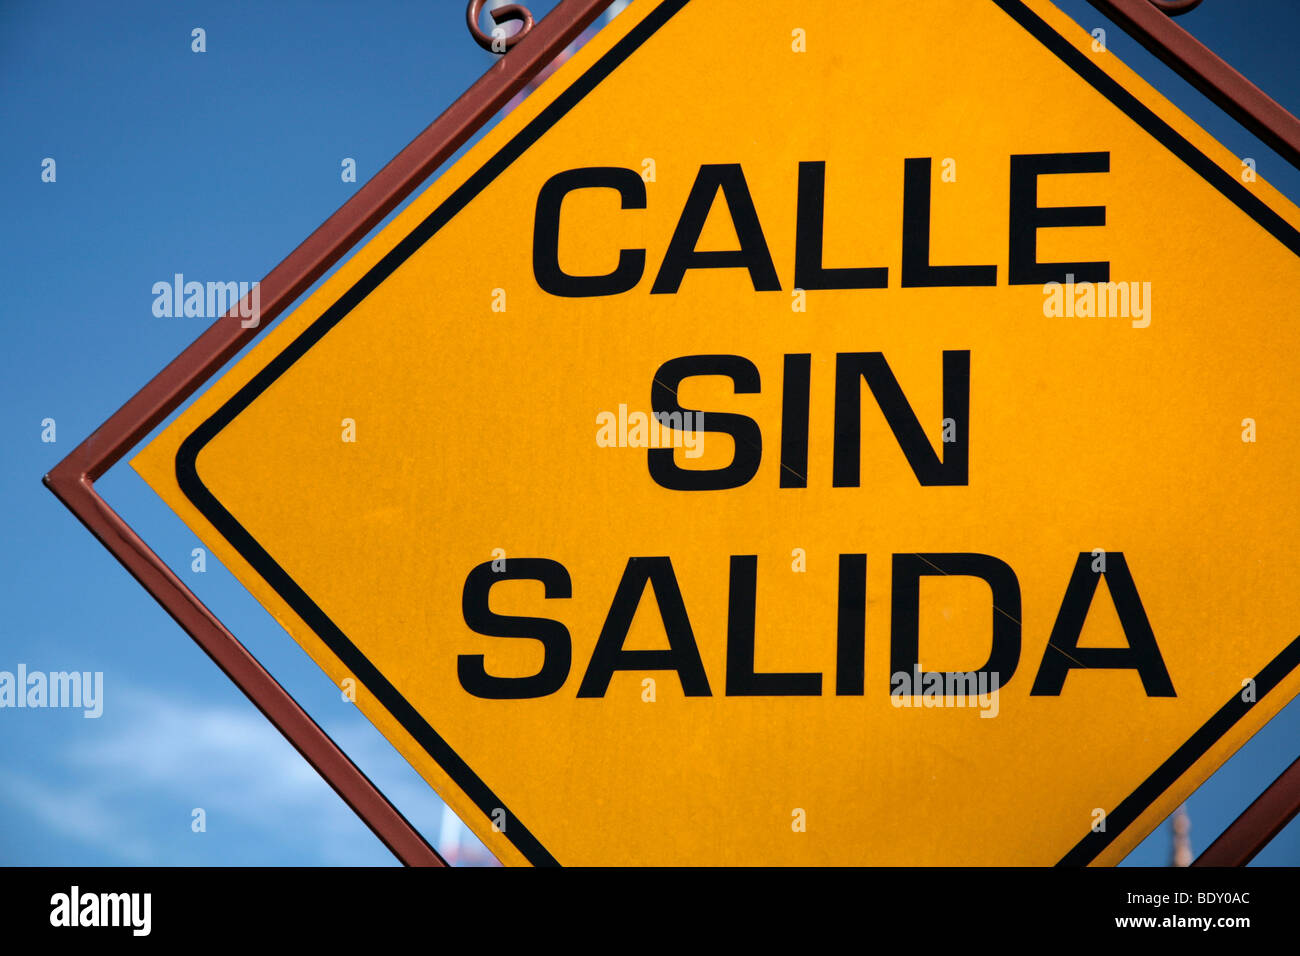 A dead road ahead sign in Spanish. Stock Photo